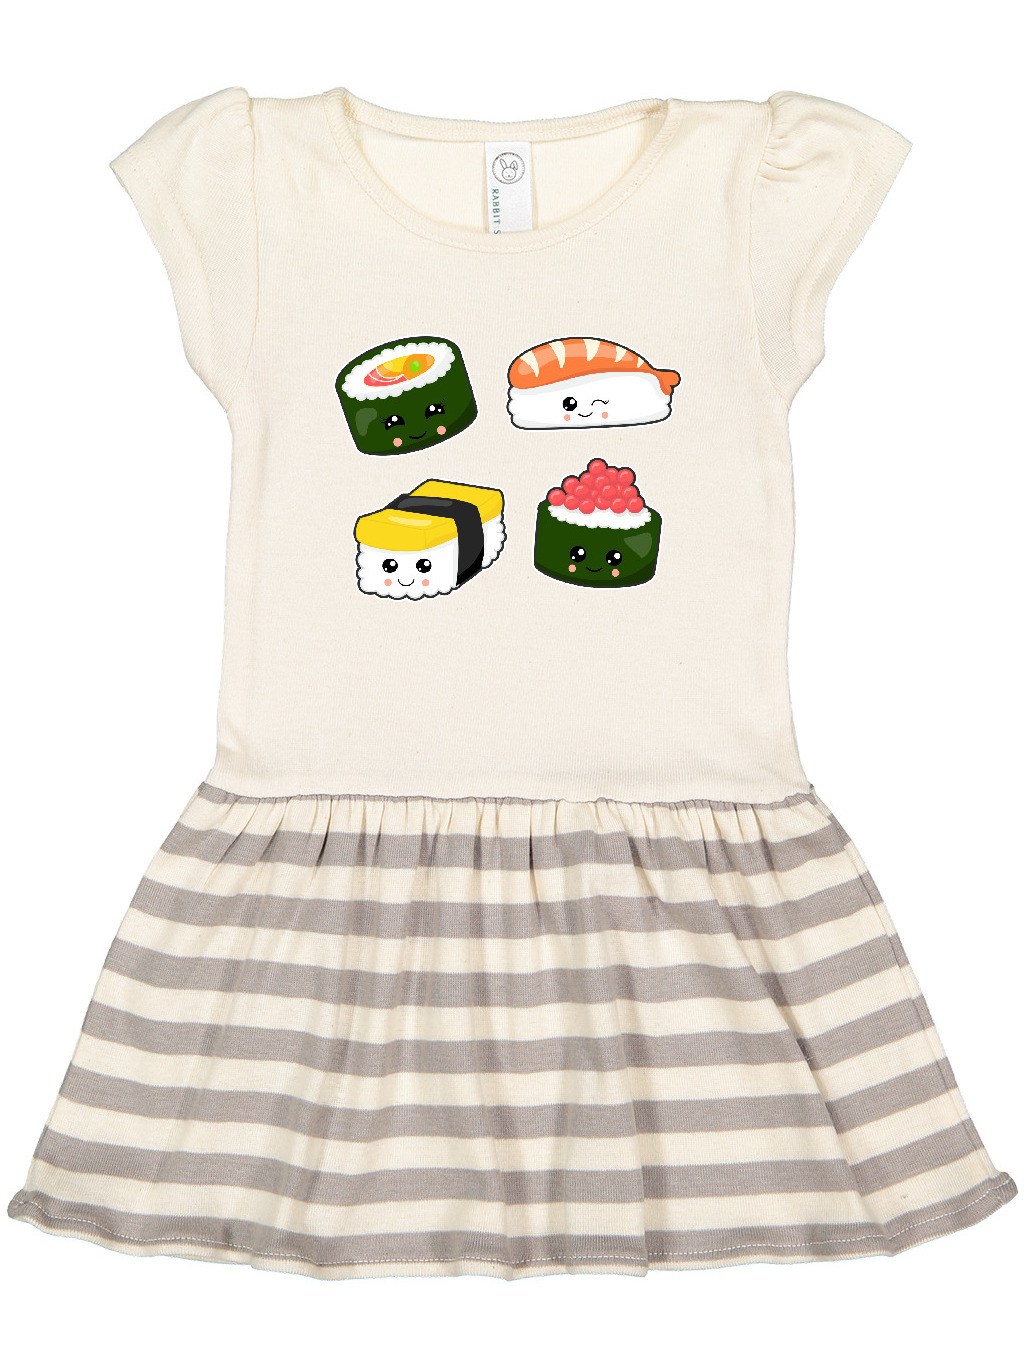 Inktastic Sushi with Faces Gift Toddler Girl Dress - image 1 of 4